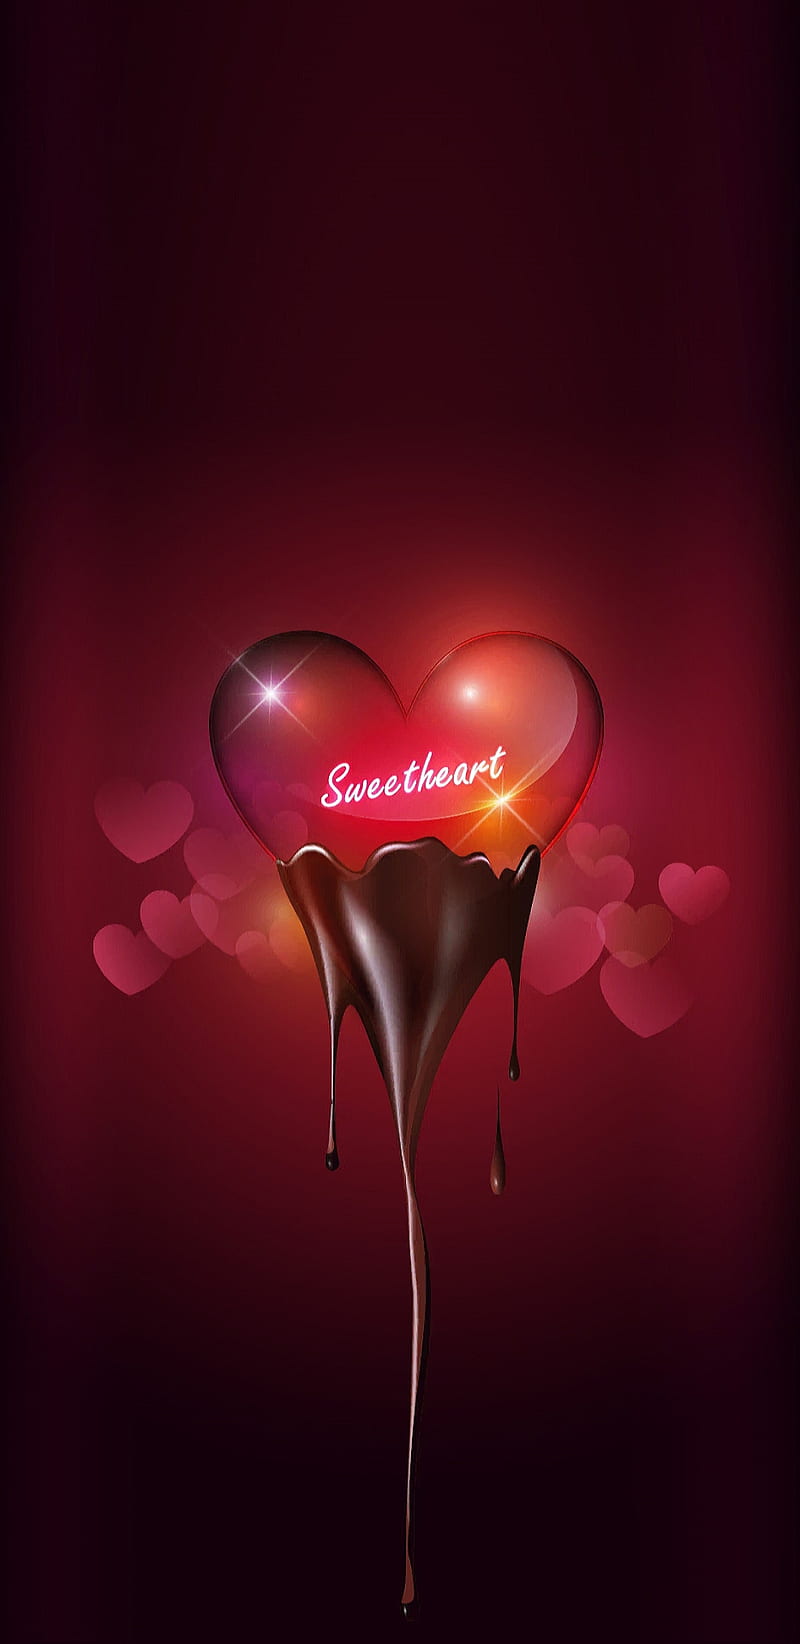 Love you sweetheart background Royalty Free Vector Image